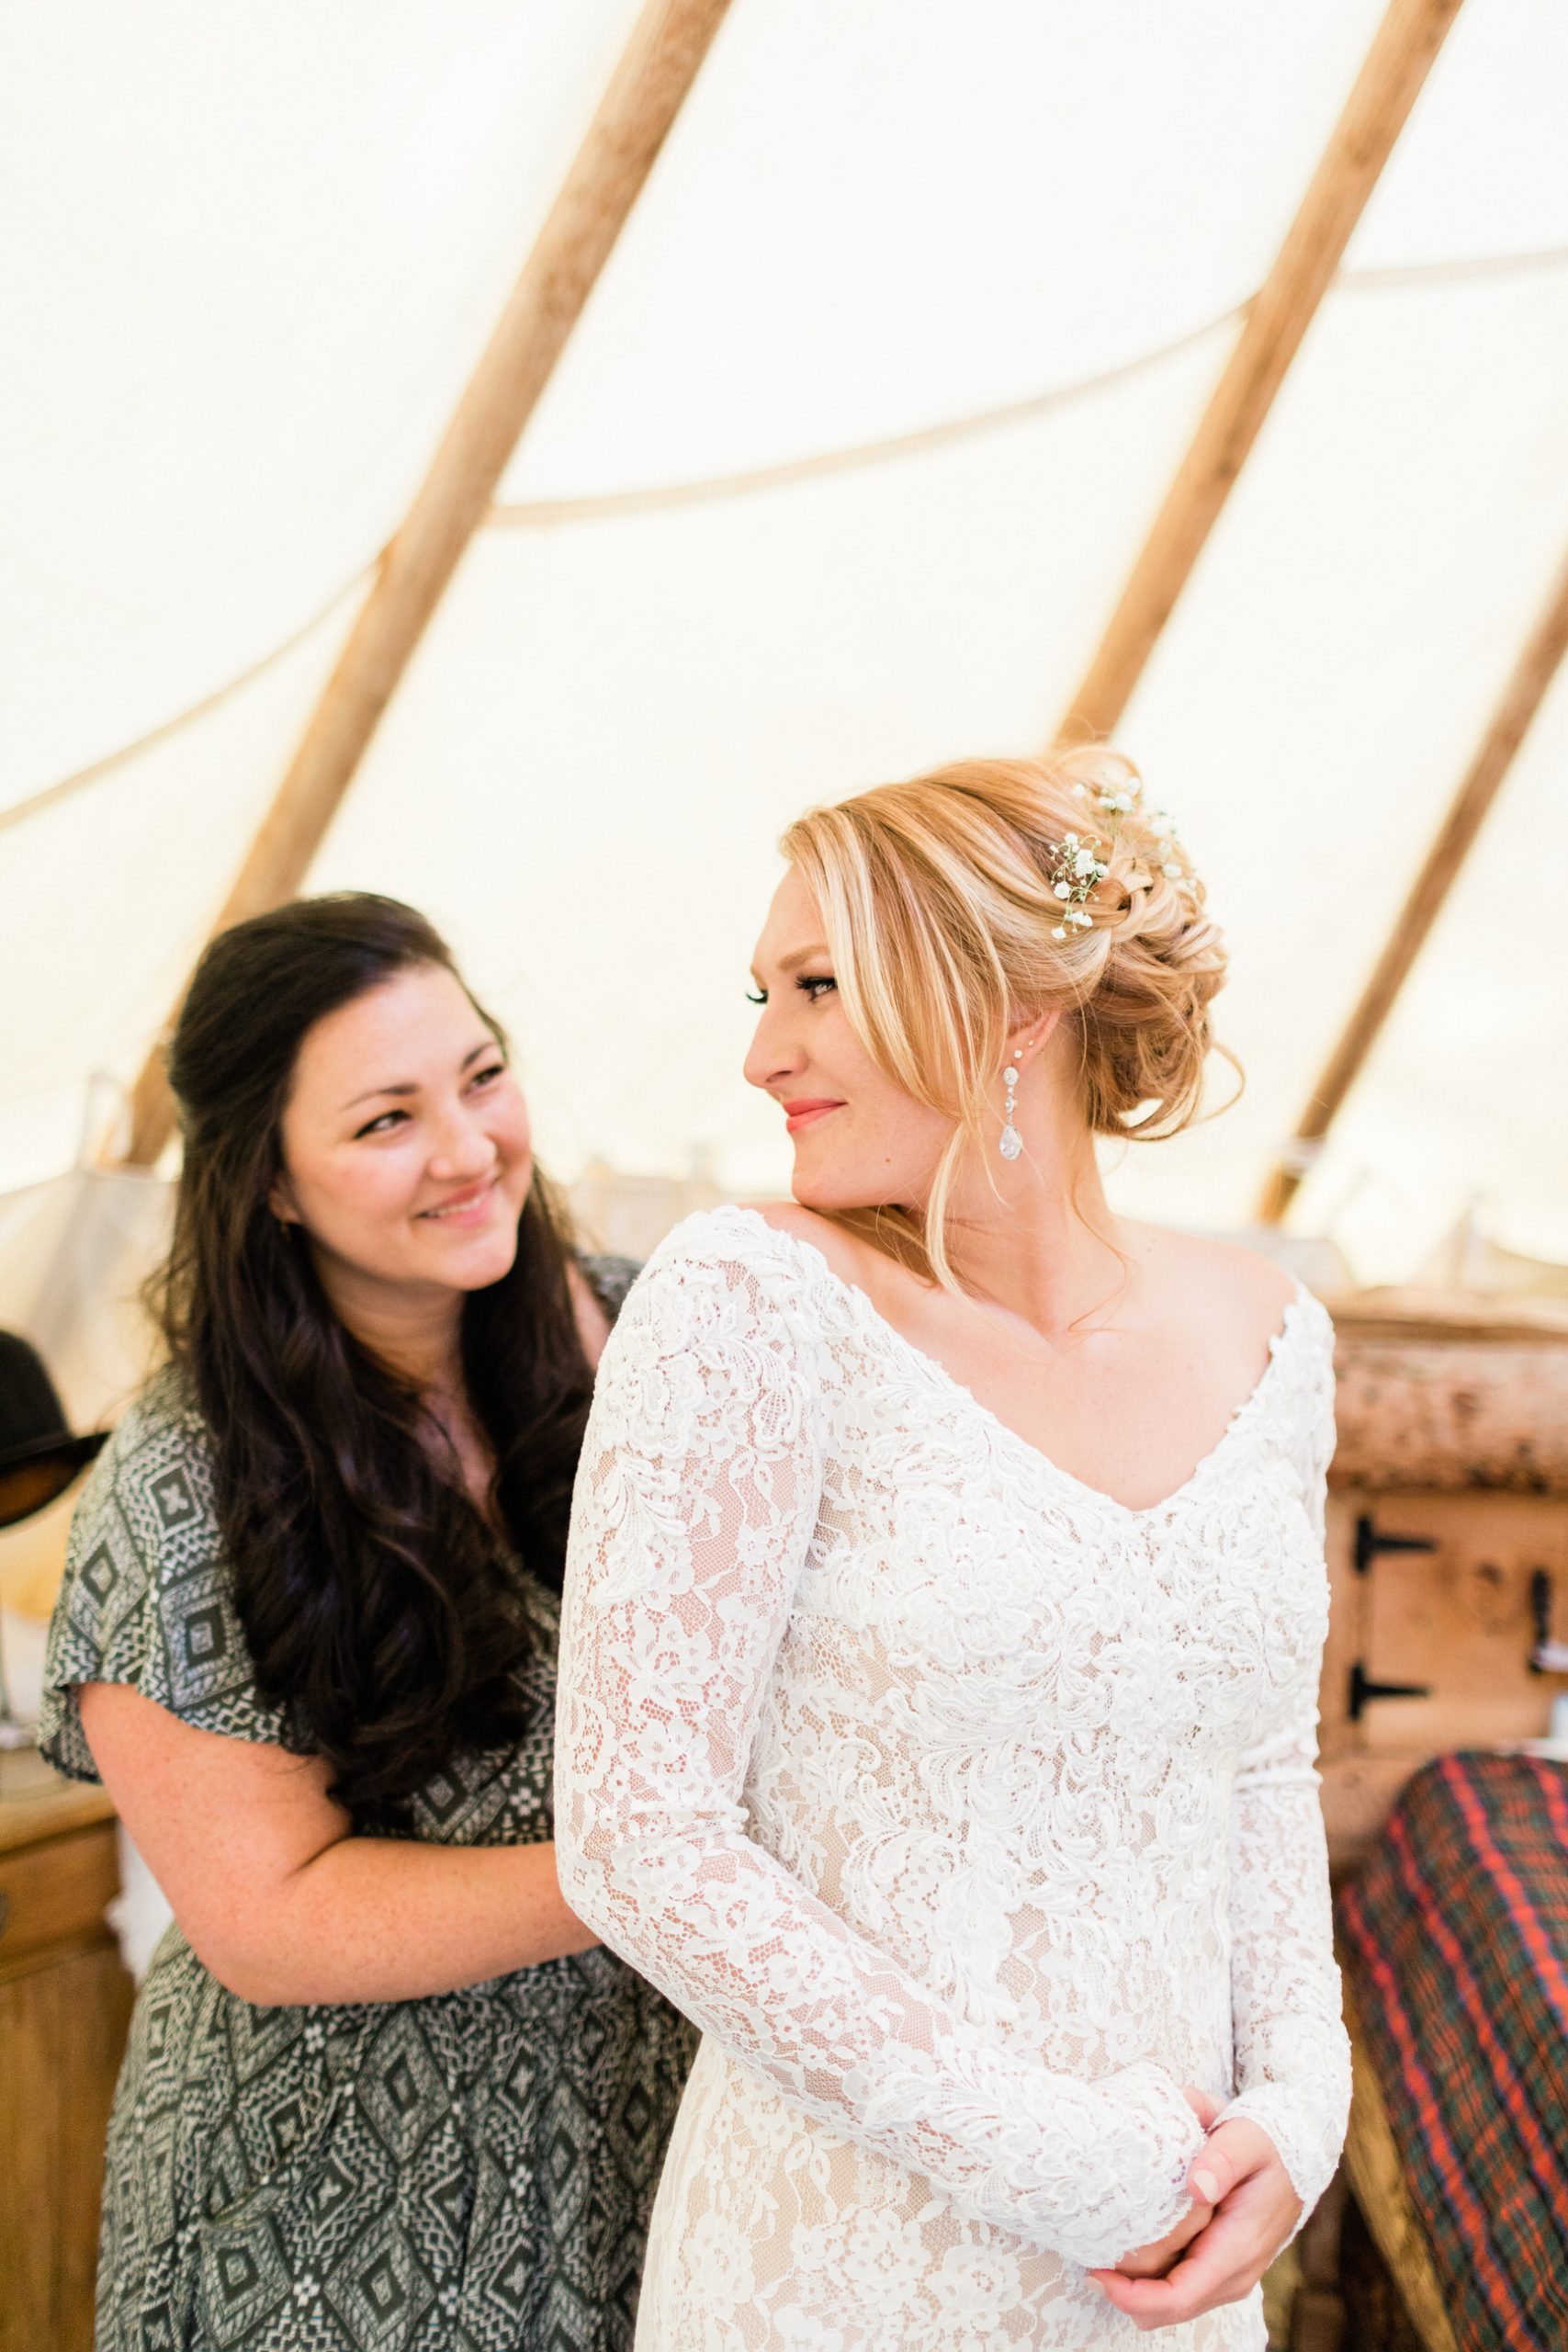 bride puts on dress before outdoor Steamboat Springs ceremony